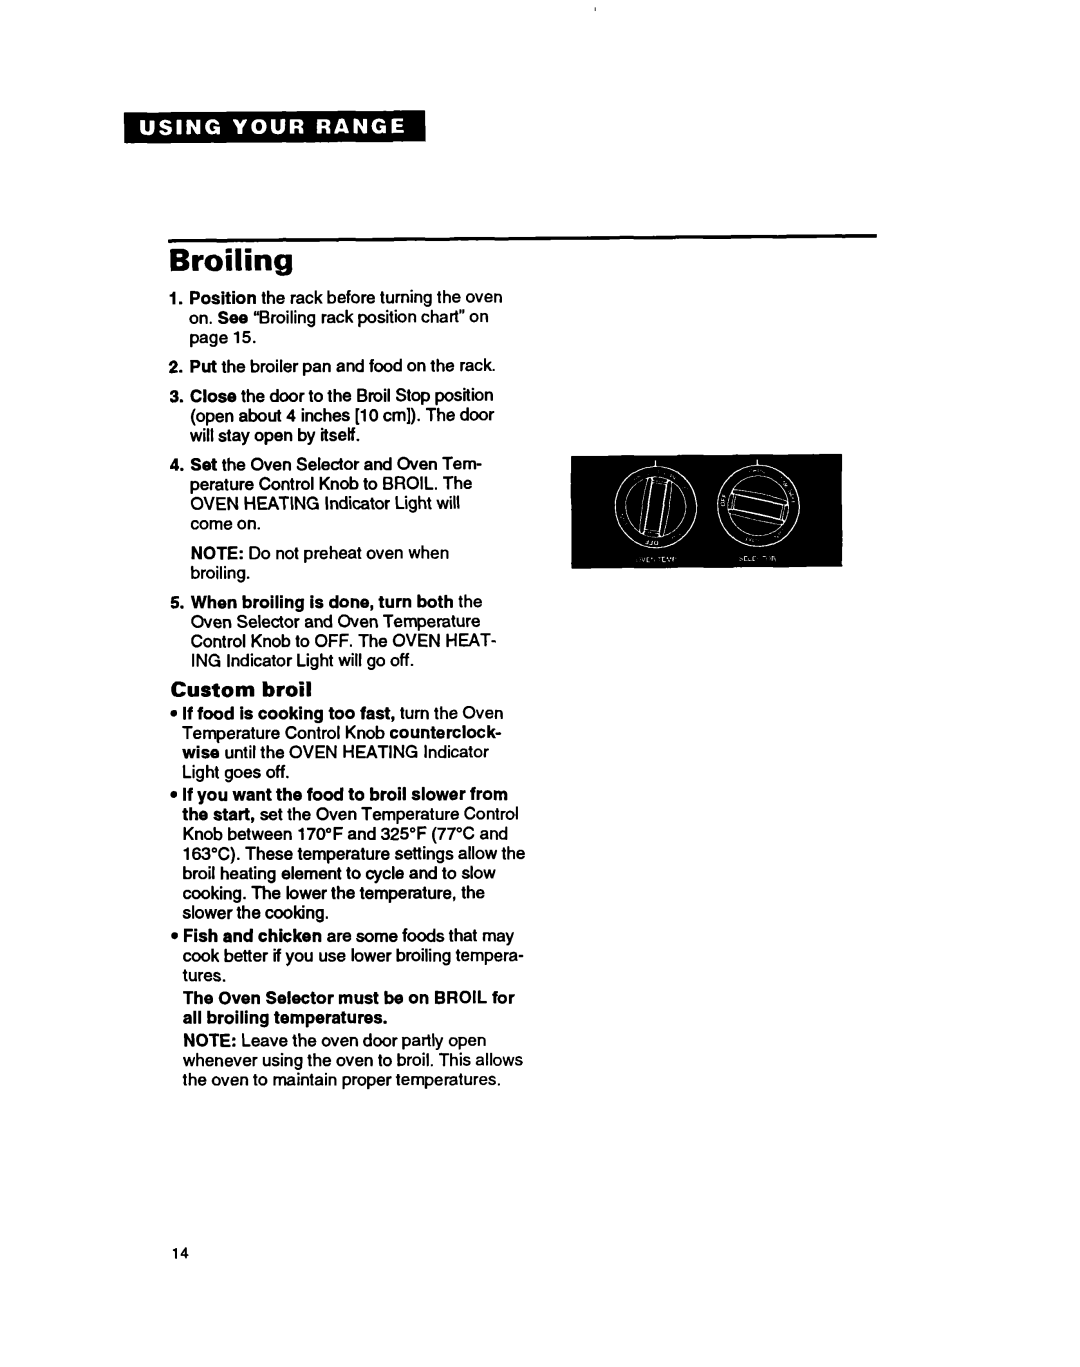 Whirlpool RF354BXB, RF364PXY, RF364BXB important safety instructions Broiling, Custom broil 